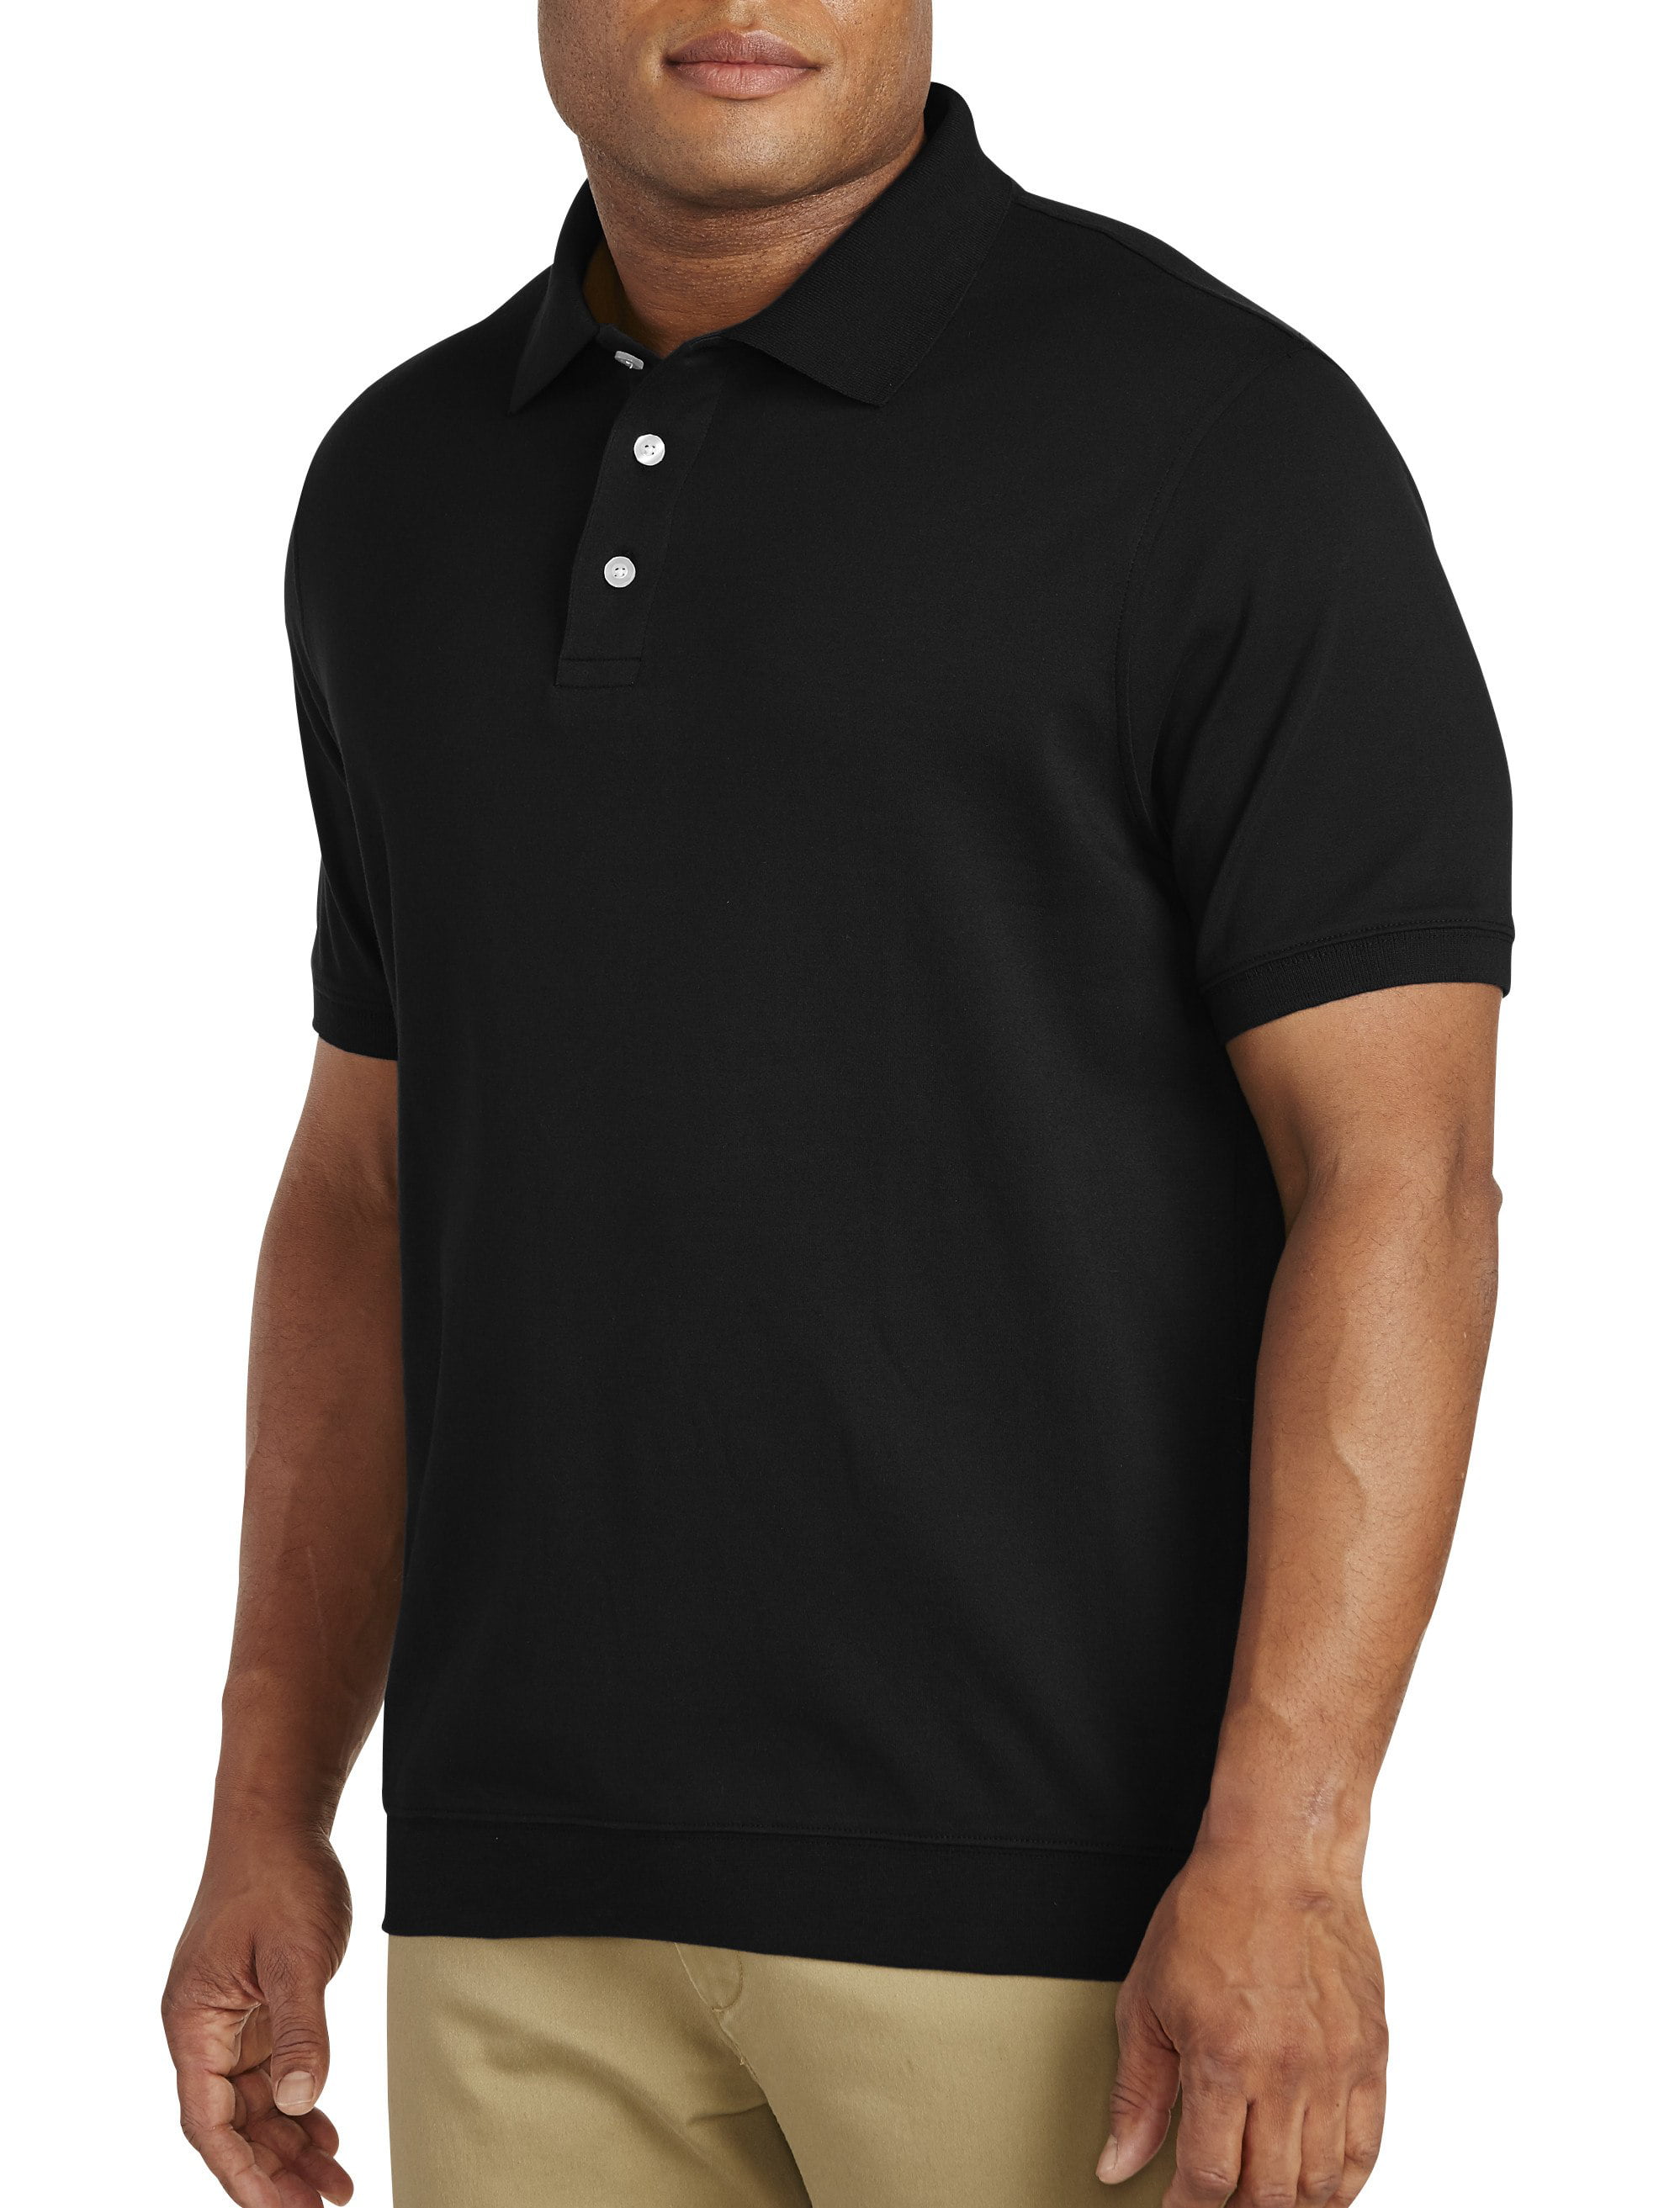 Harbor Bay by DXL Big and Tall Short-Sleeve Moisture-Wicking Polo Shirt with Banded Bottom 